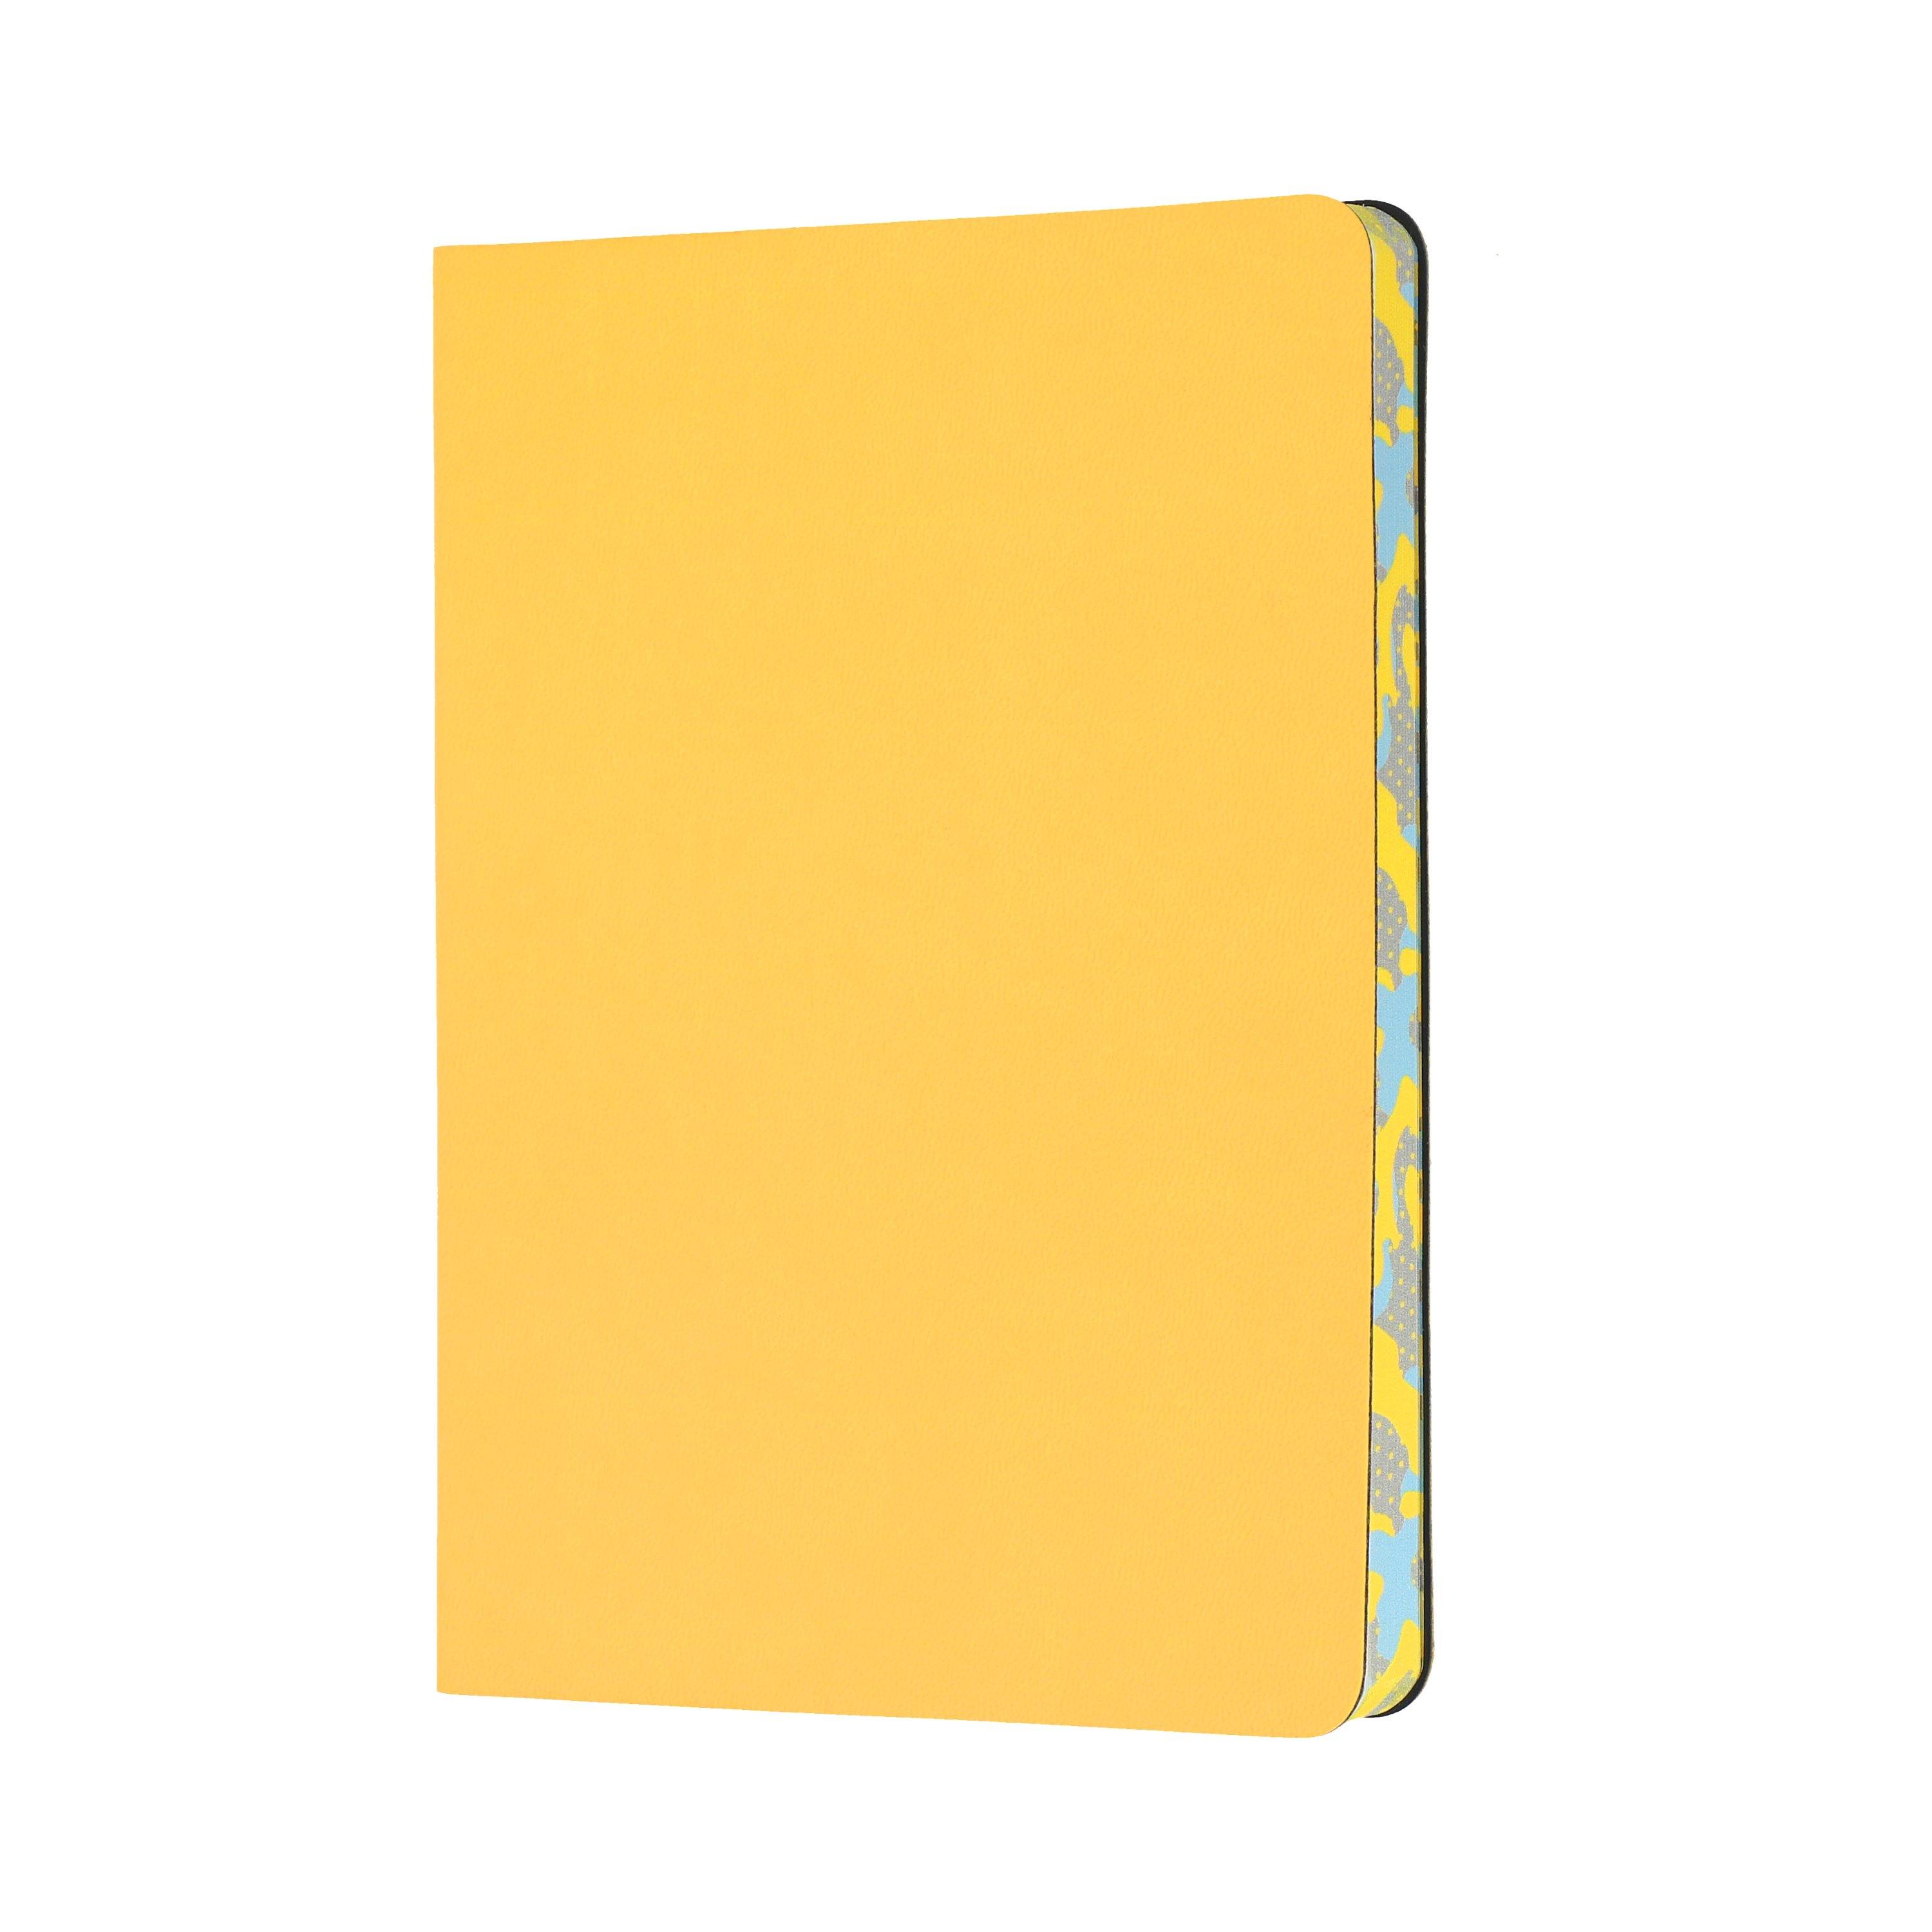 Edge -  Notebook A5Ruled - Collins Debden